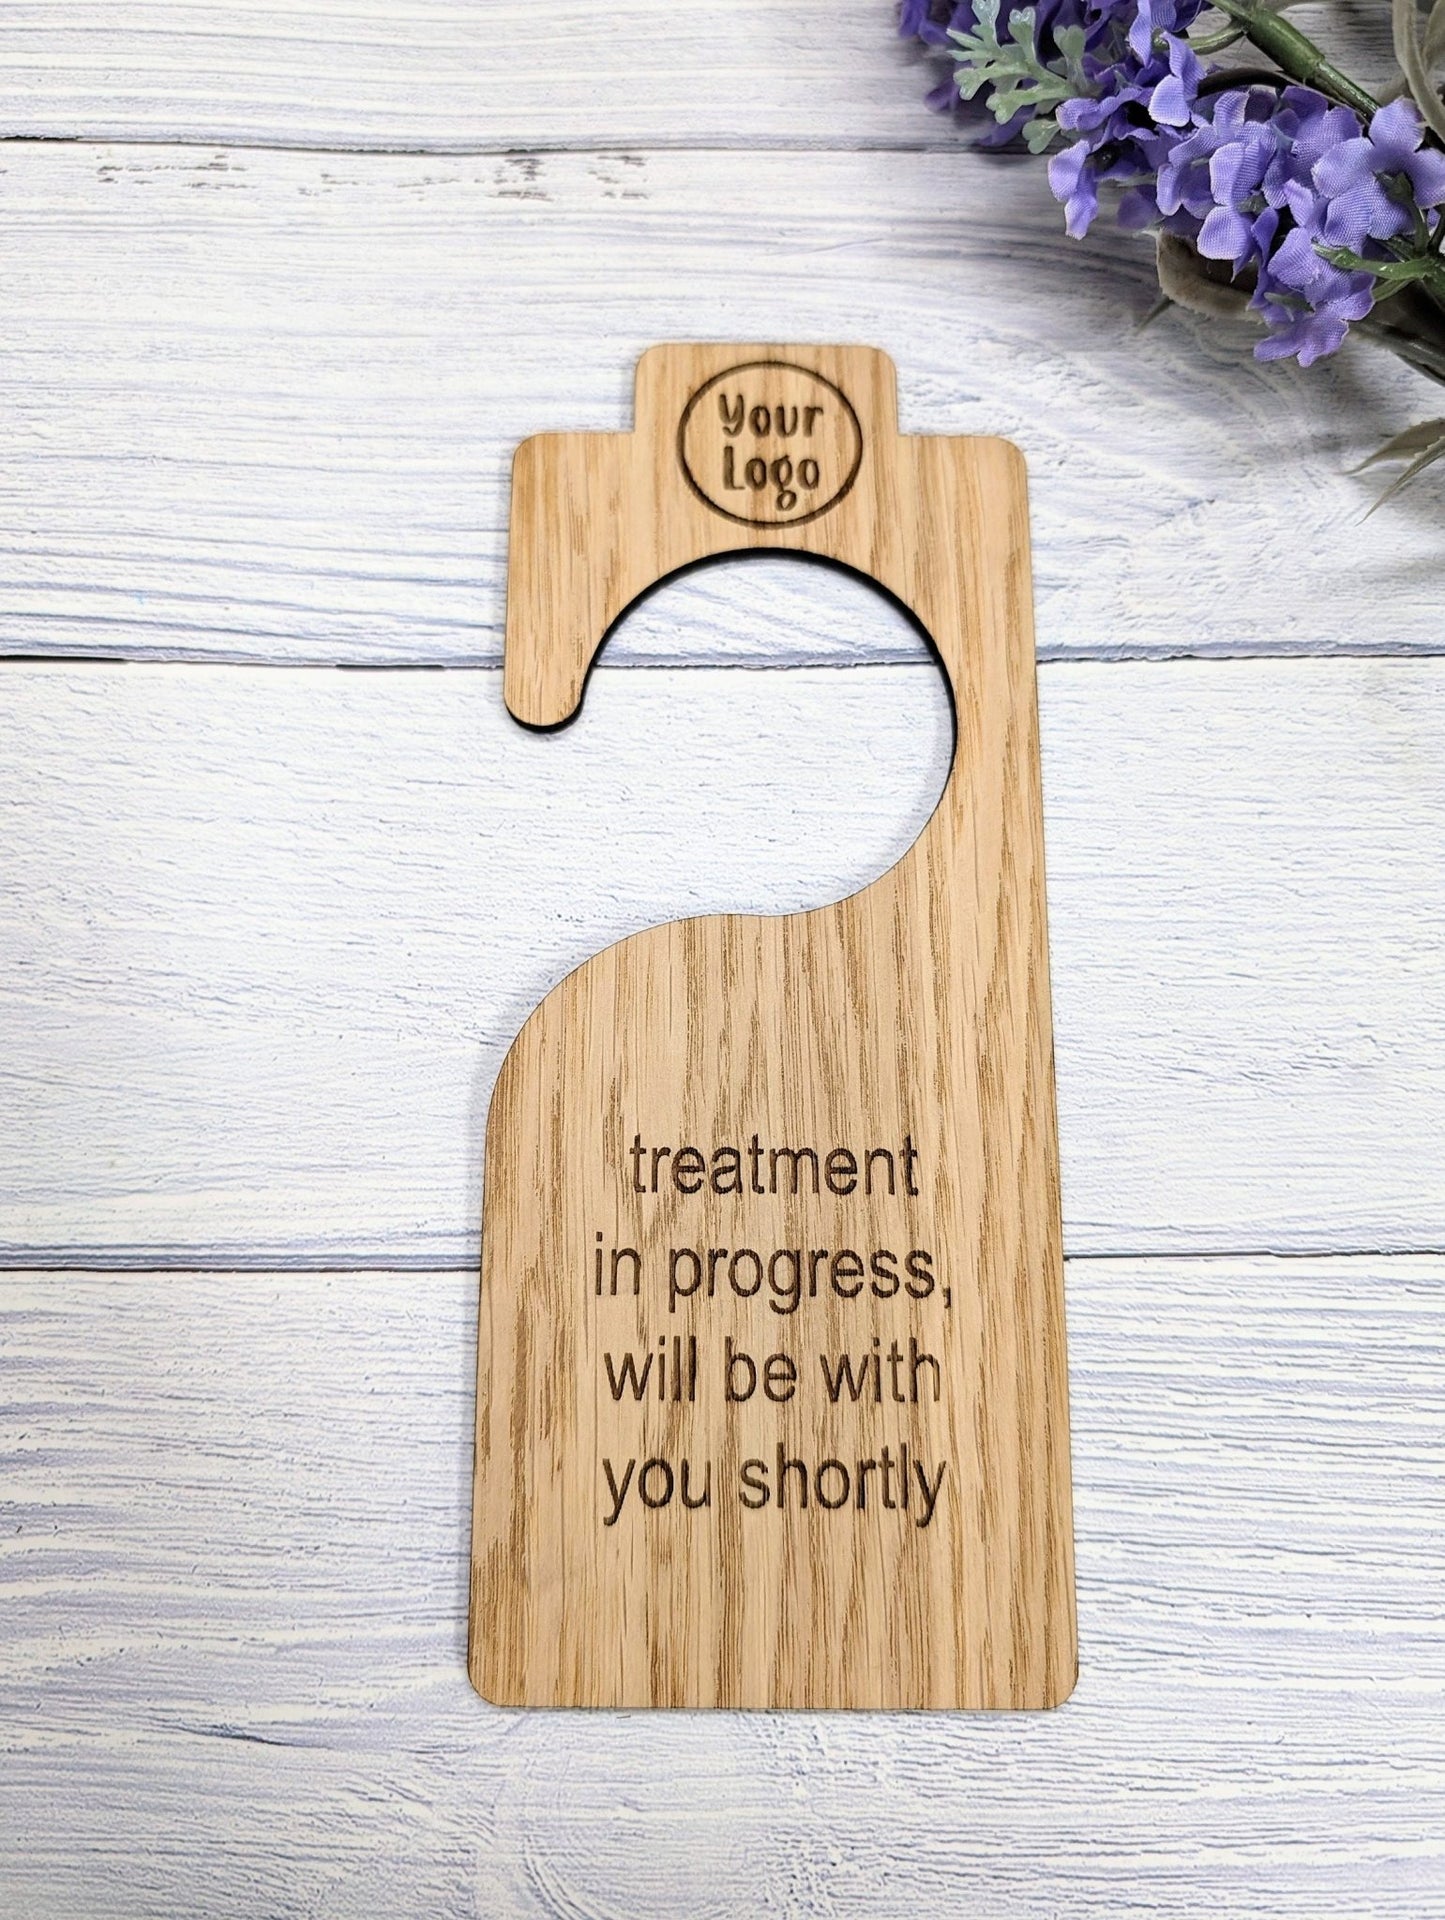 Personalised Double-Sided Door Hanger with Open Hook Design - Custom Messages & Logo Option - Ideal for Businesses and Homes - CherryGroveCraft